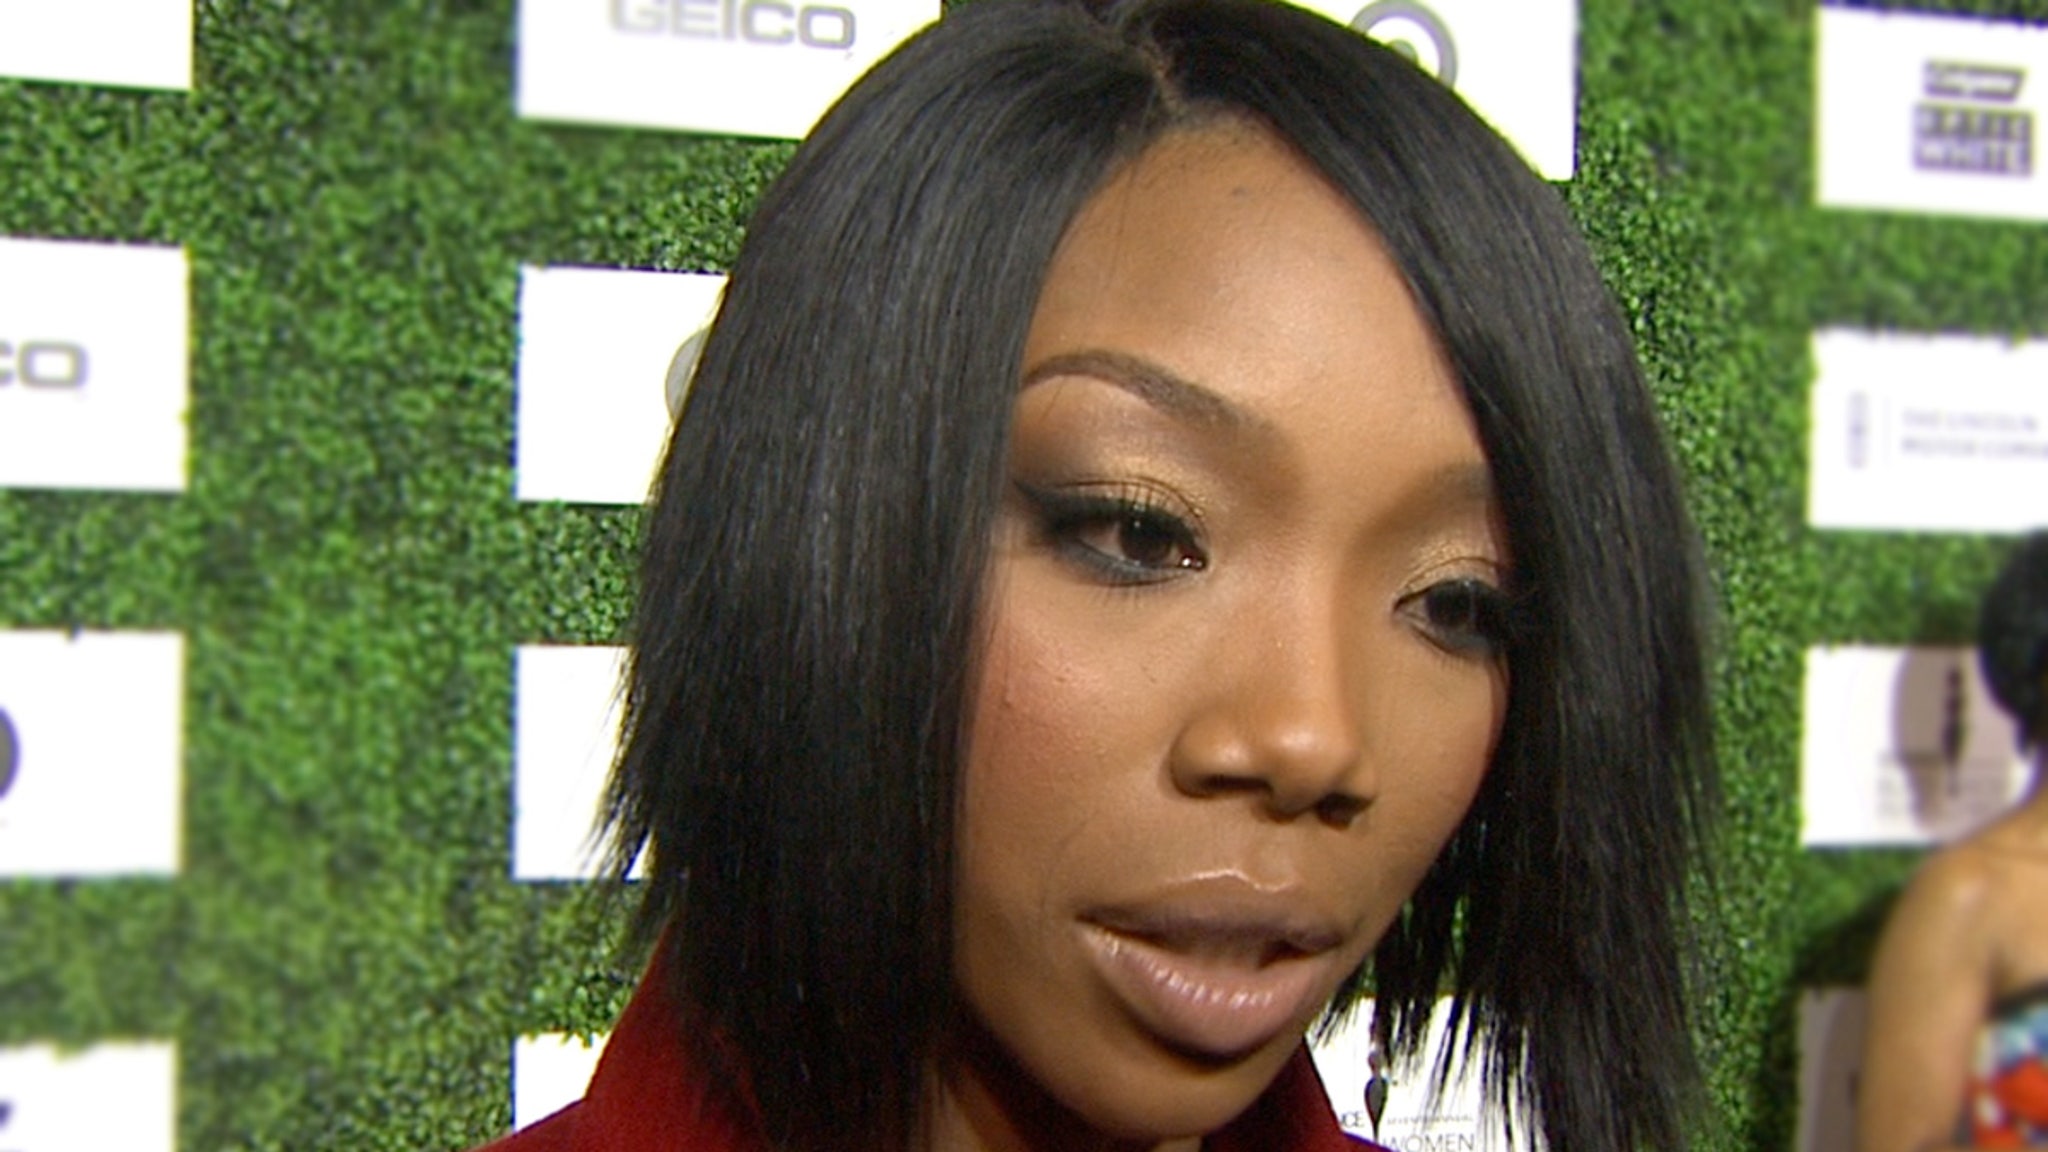 Brandy Hospitalized for Possible Seizure After Medical Incident at L.A. Home #Brandy